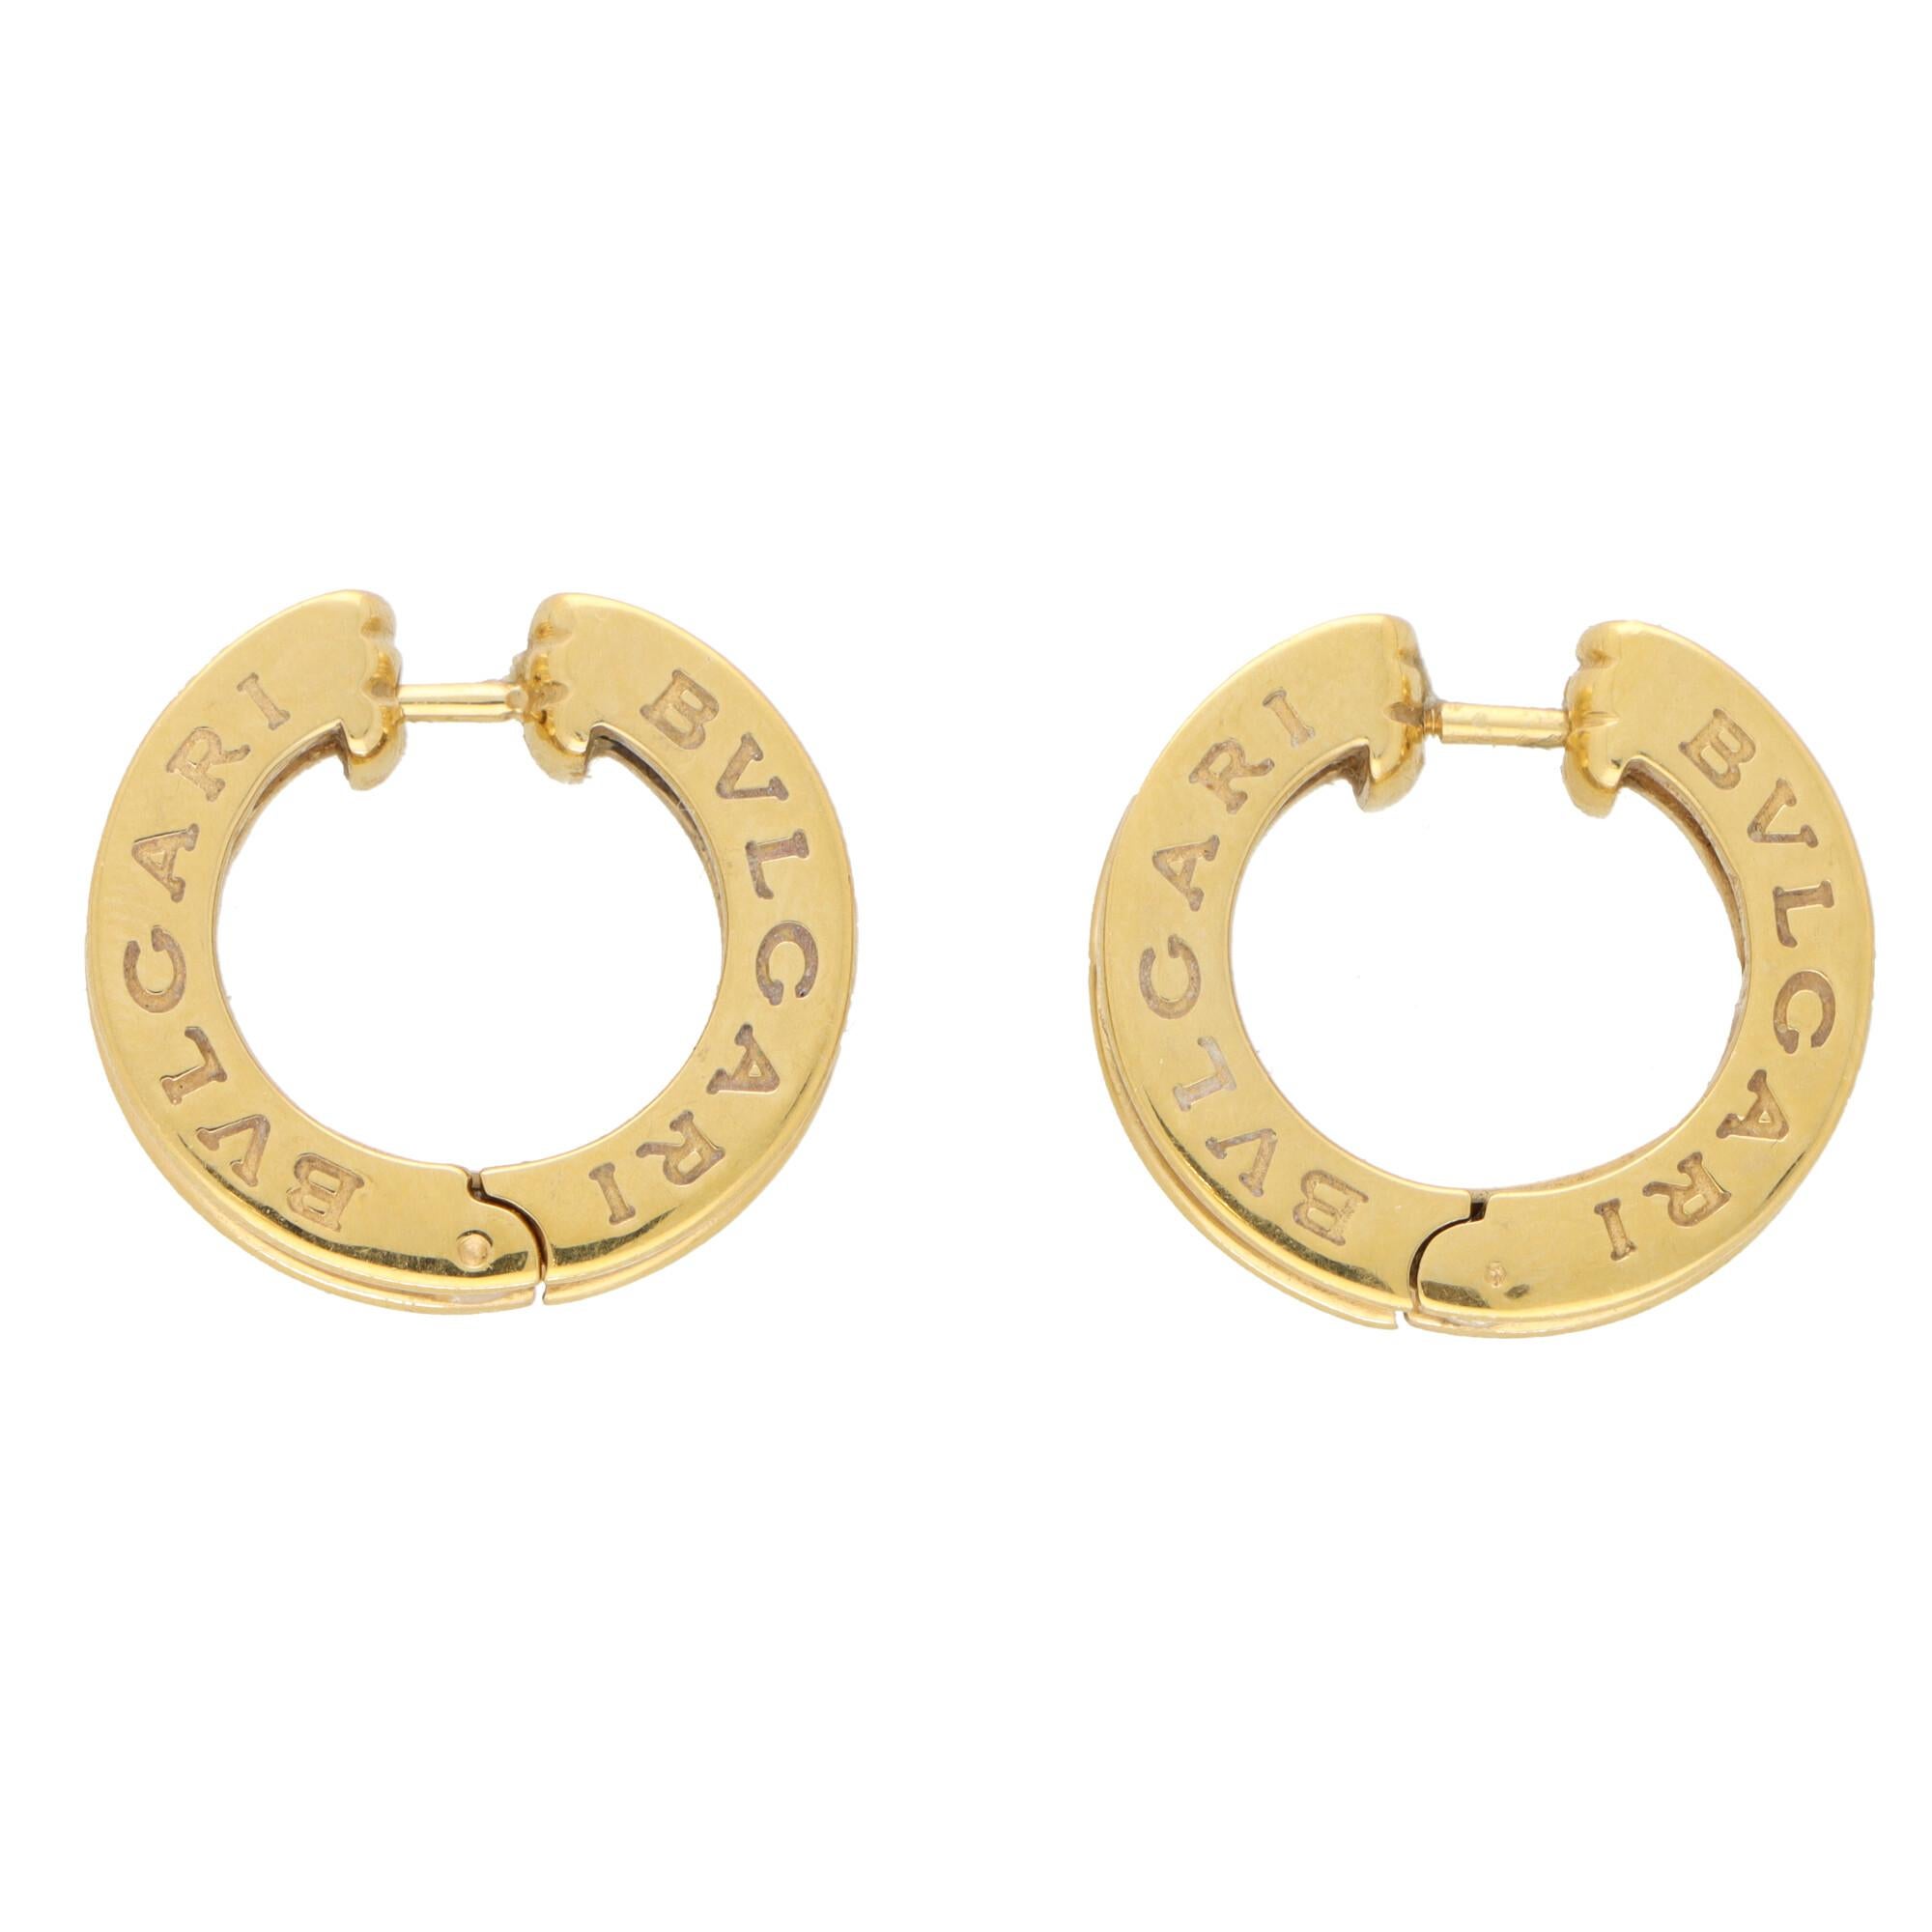 A stylish pair of vintage Bvlgari B.zero1 diamond hoop earrings set in 18k yellow gold. 

The earrings are designed in the iconic Bvlgari B.zero1 motif, and are set half way with round brilliant cut diamonds. The hoops are secured with a post and